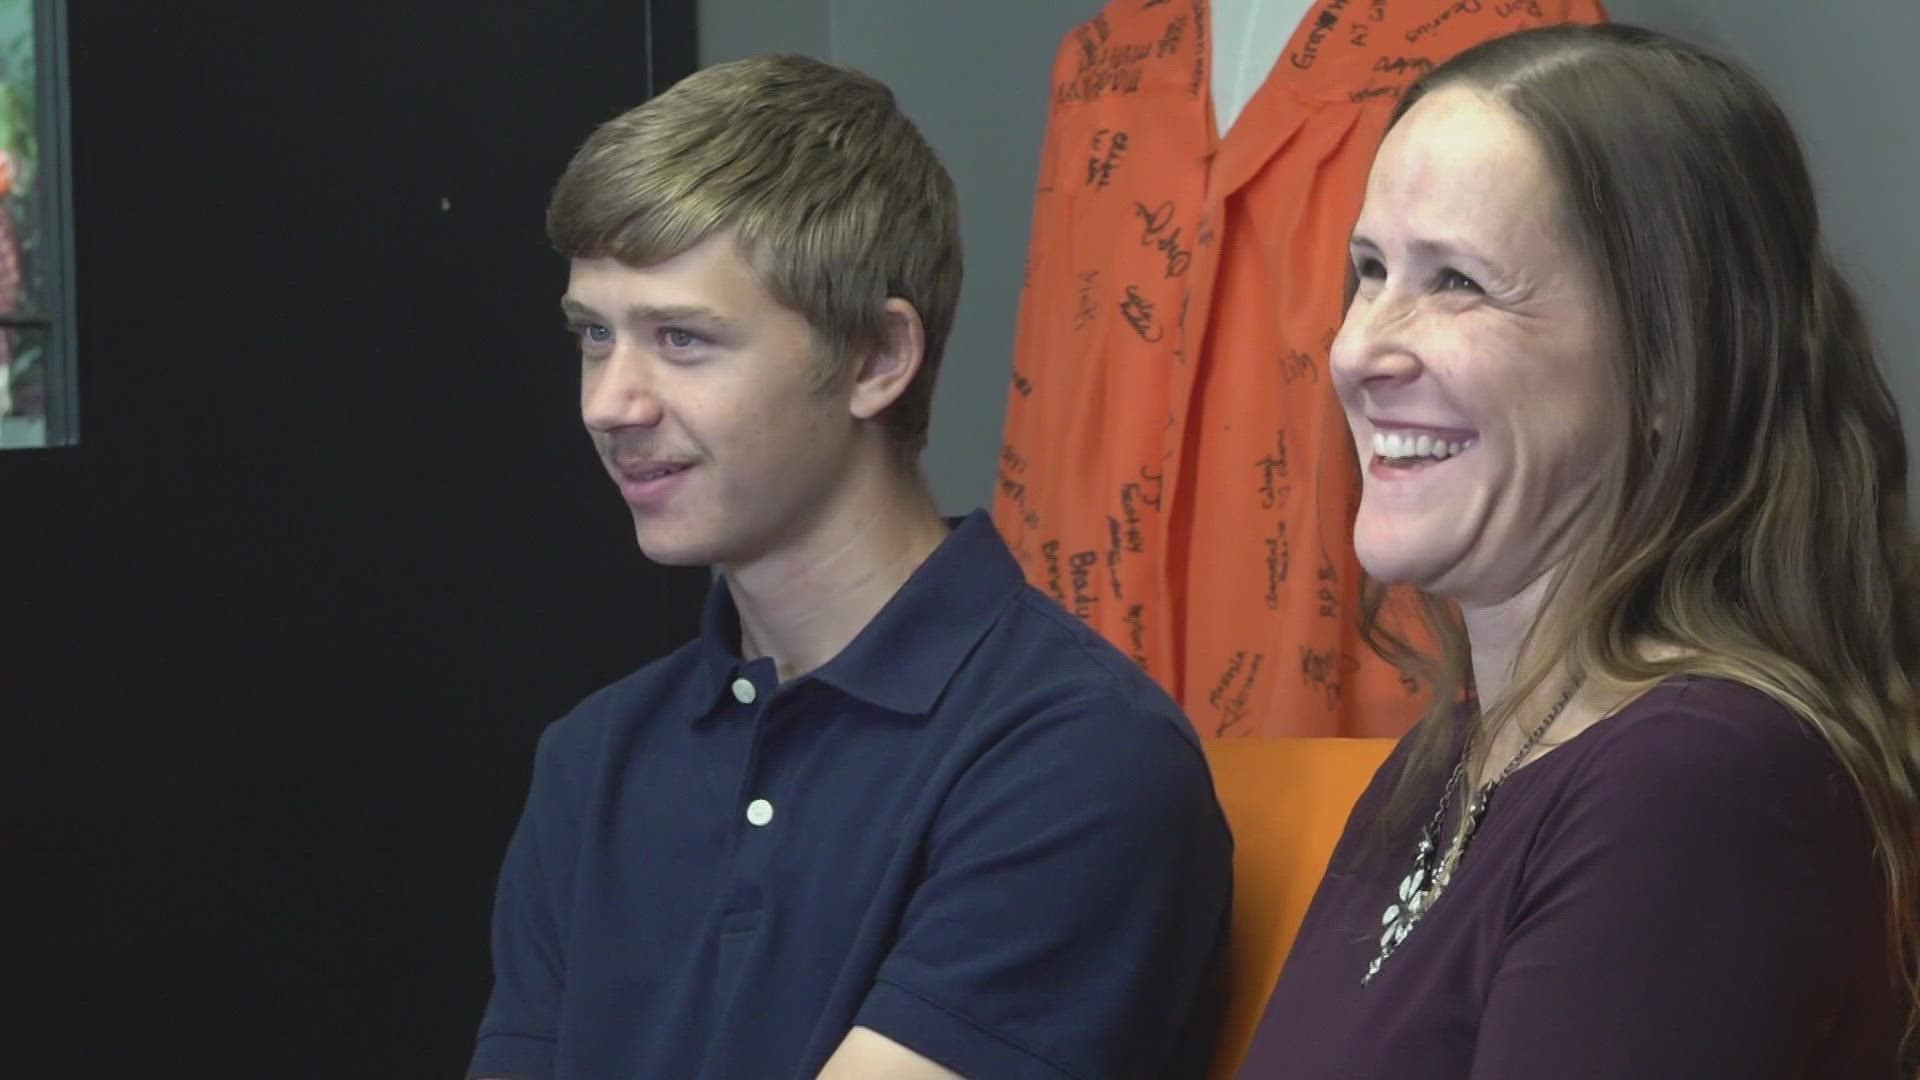 Meet Zack Carter, a junior at Powell High School and one of just 0.5% of students to get a perfect ACT score.